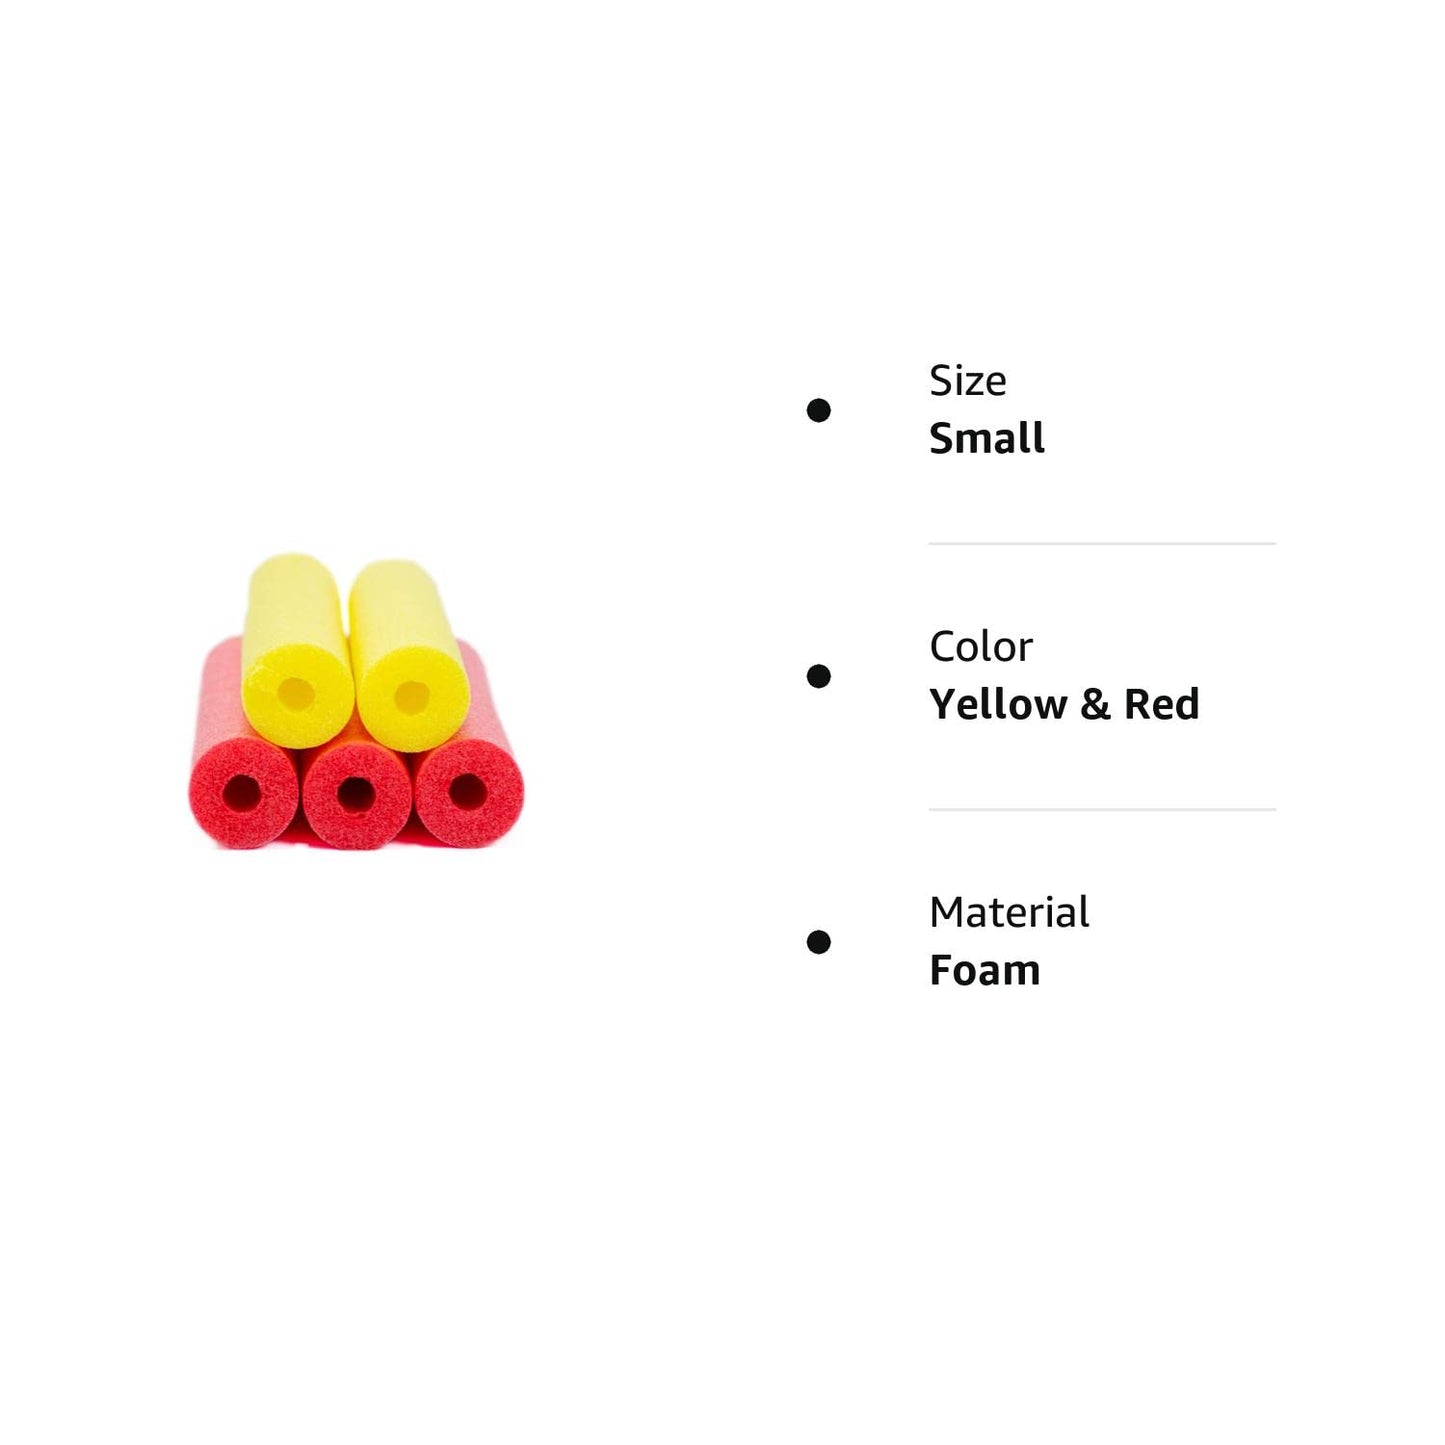 Pool Noodle, FixFind 5 Pack of 52 Inch Hollow Foam Pool Swim Noodle, Bright Foam Noodles for Swimming, Floating and Craft Projects Yellow & Red